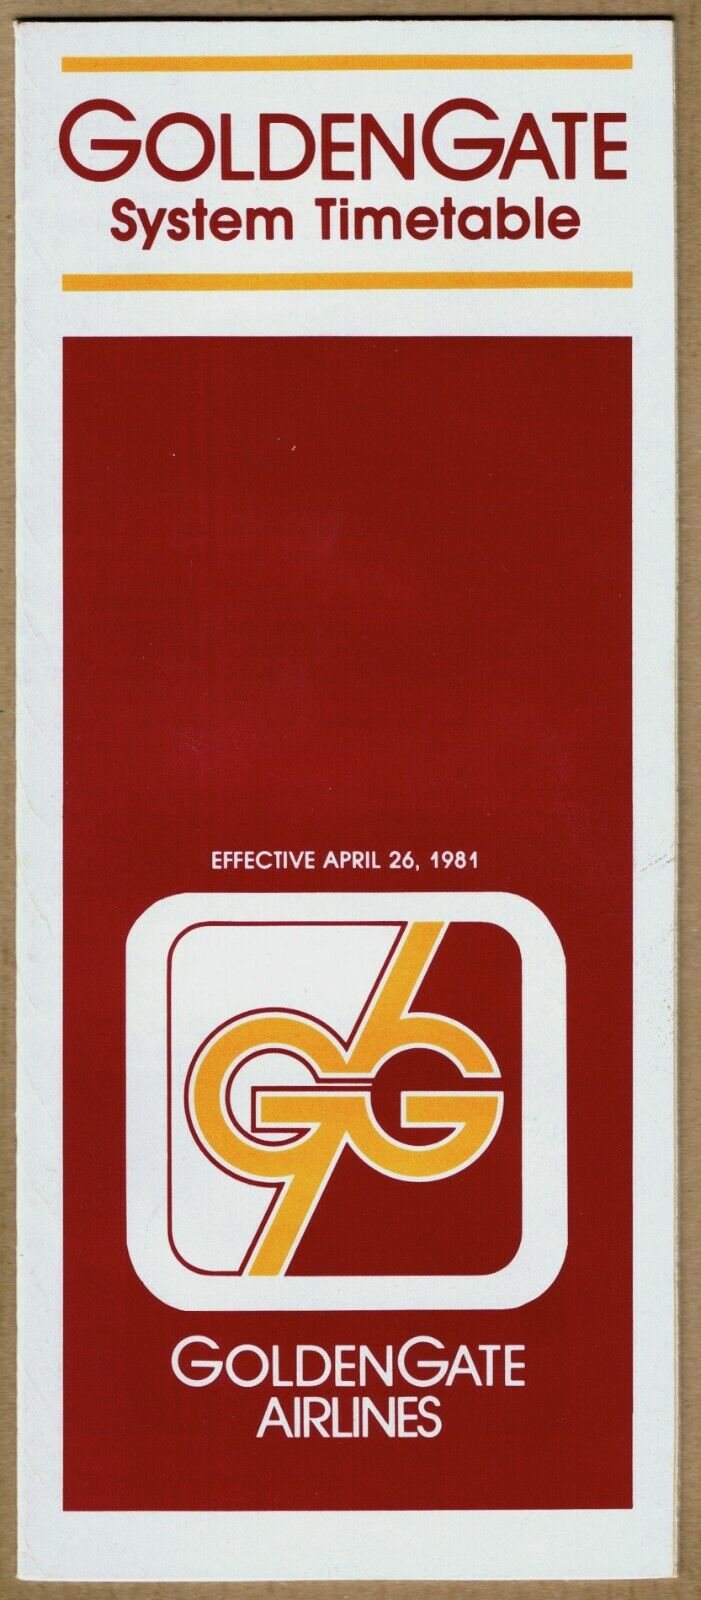 Golden Gate Airlines Timetable  April 26, 1981 =